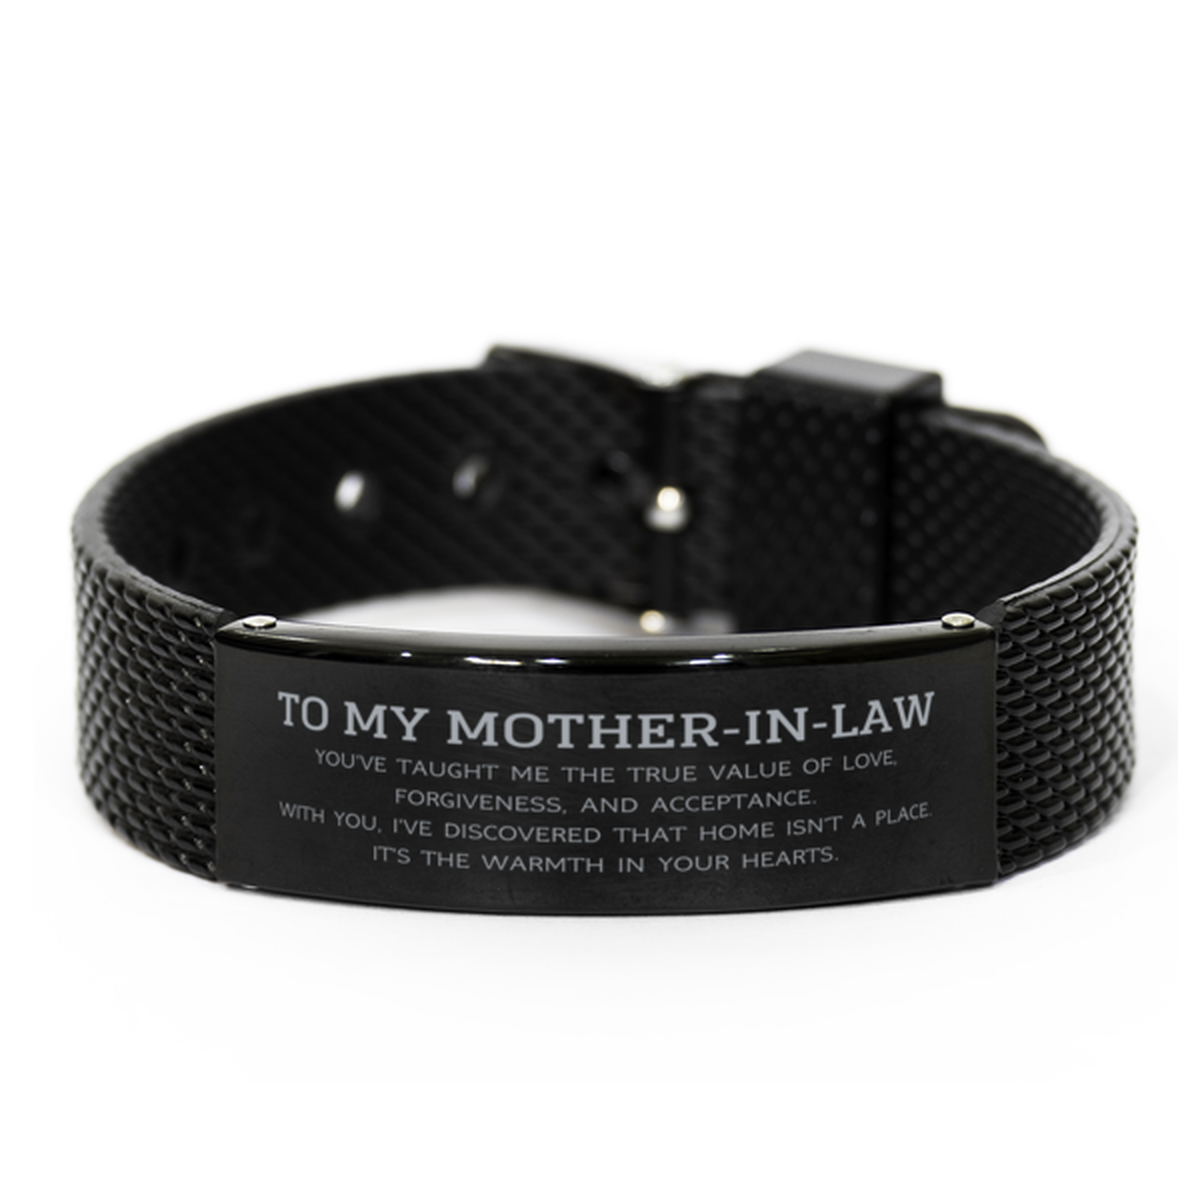 To My Mother-In-Law Gifts, You've taught me the true value of love, Thank You Gifts For Mother-In-Law, Birthday Black Shark Mesh Bracelet For Mother-In-Law